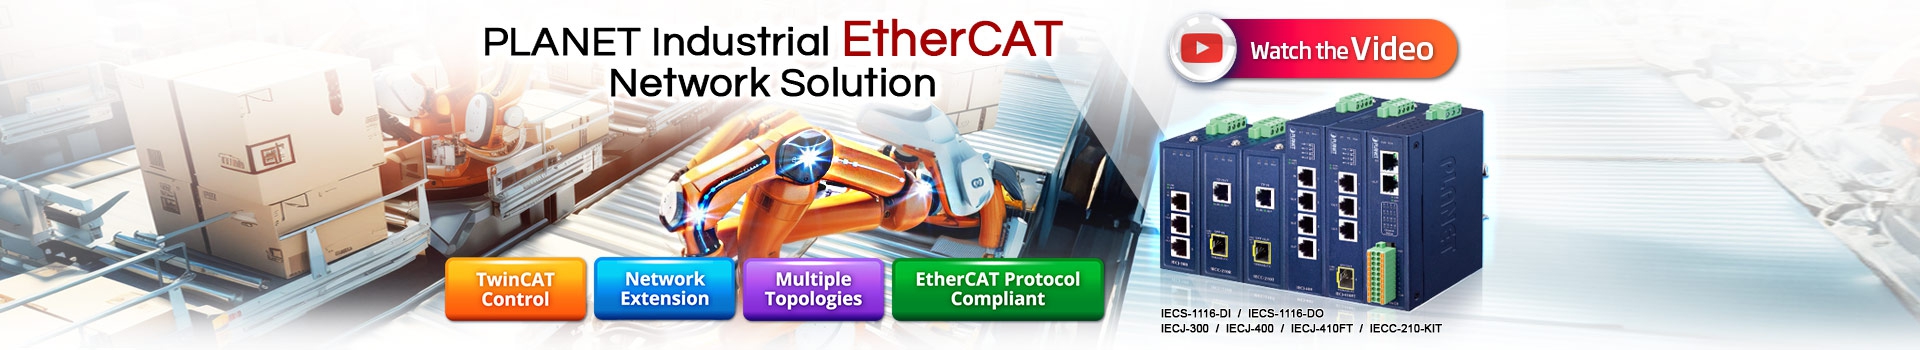 Complete Industrial EtherCAT Network Solution